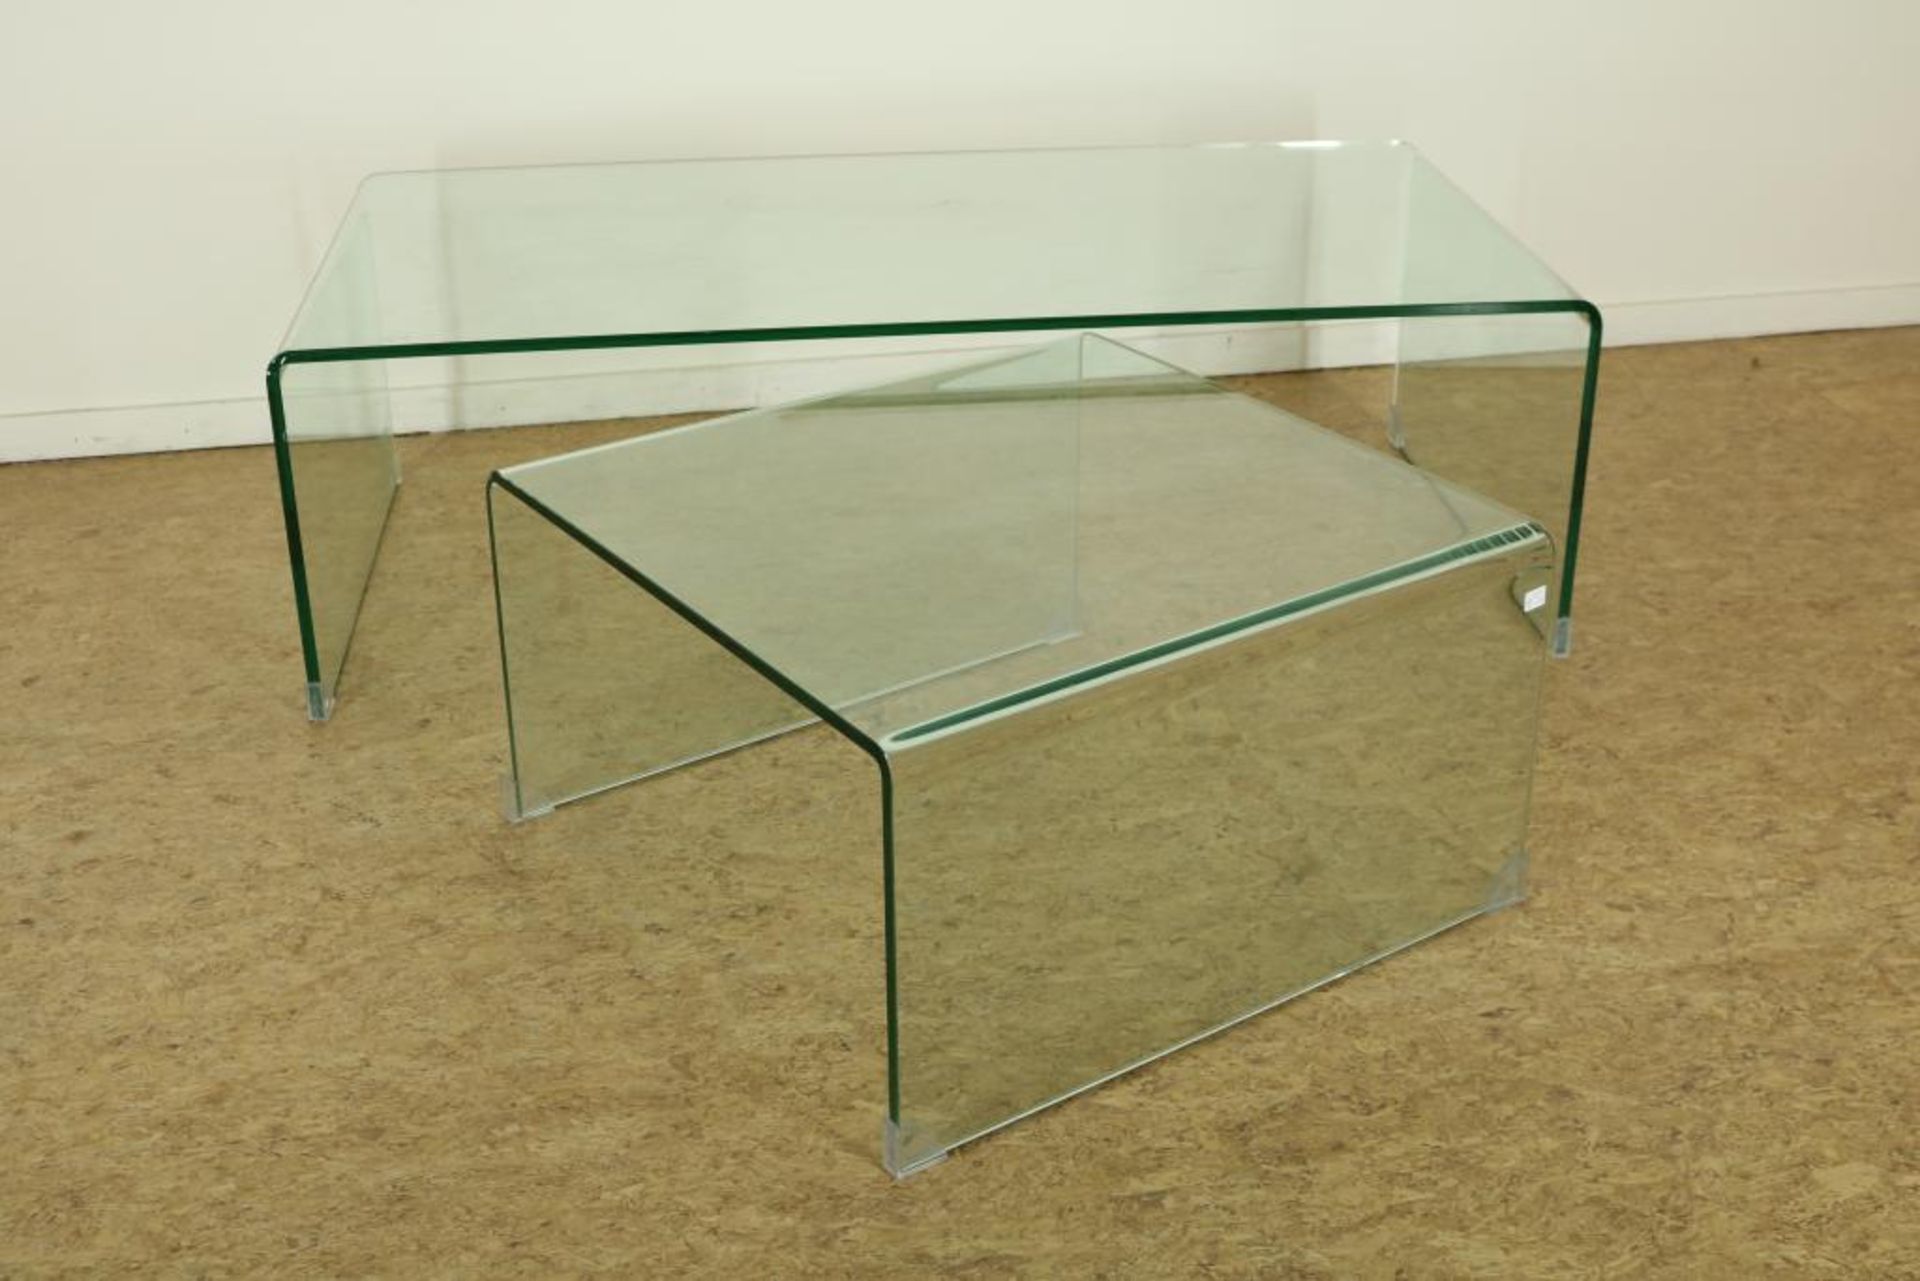 Lot of a curved glass design side tables, h. 36, w. 119, d. 60 cm. And a matching side table, h